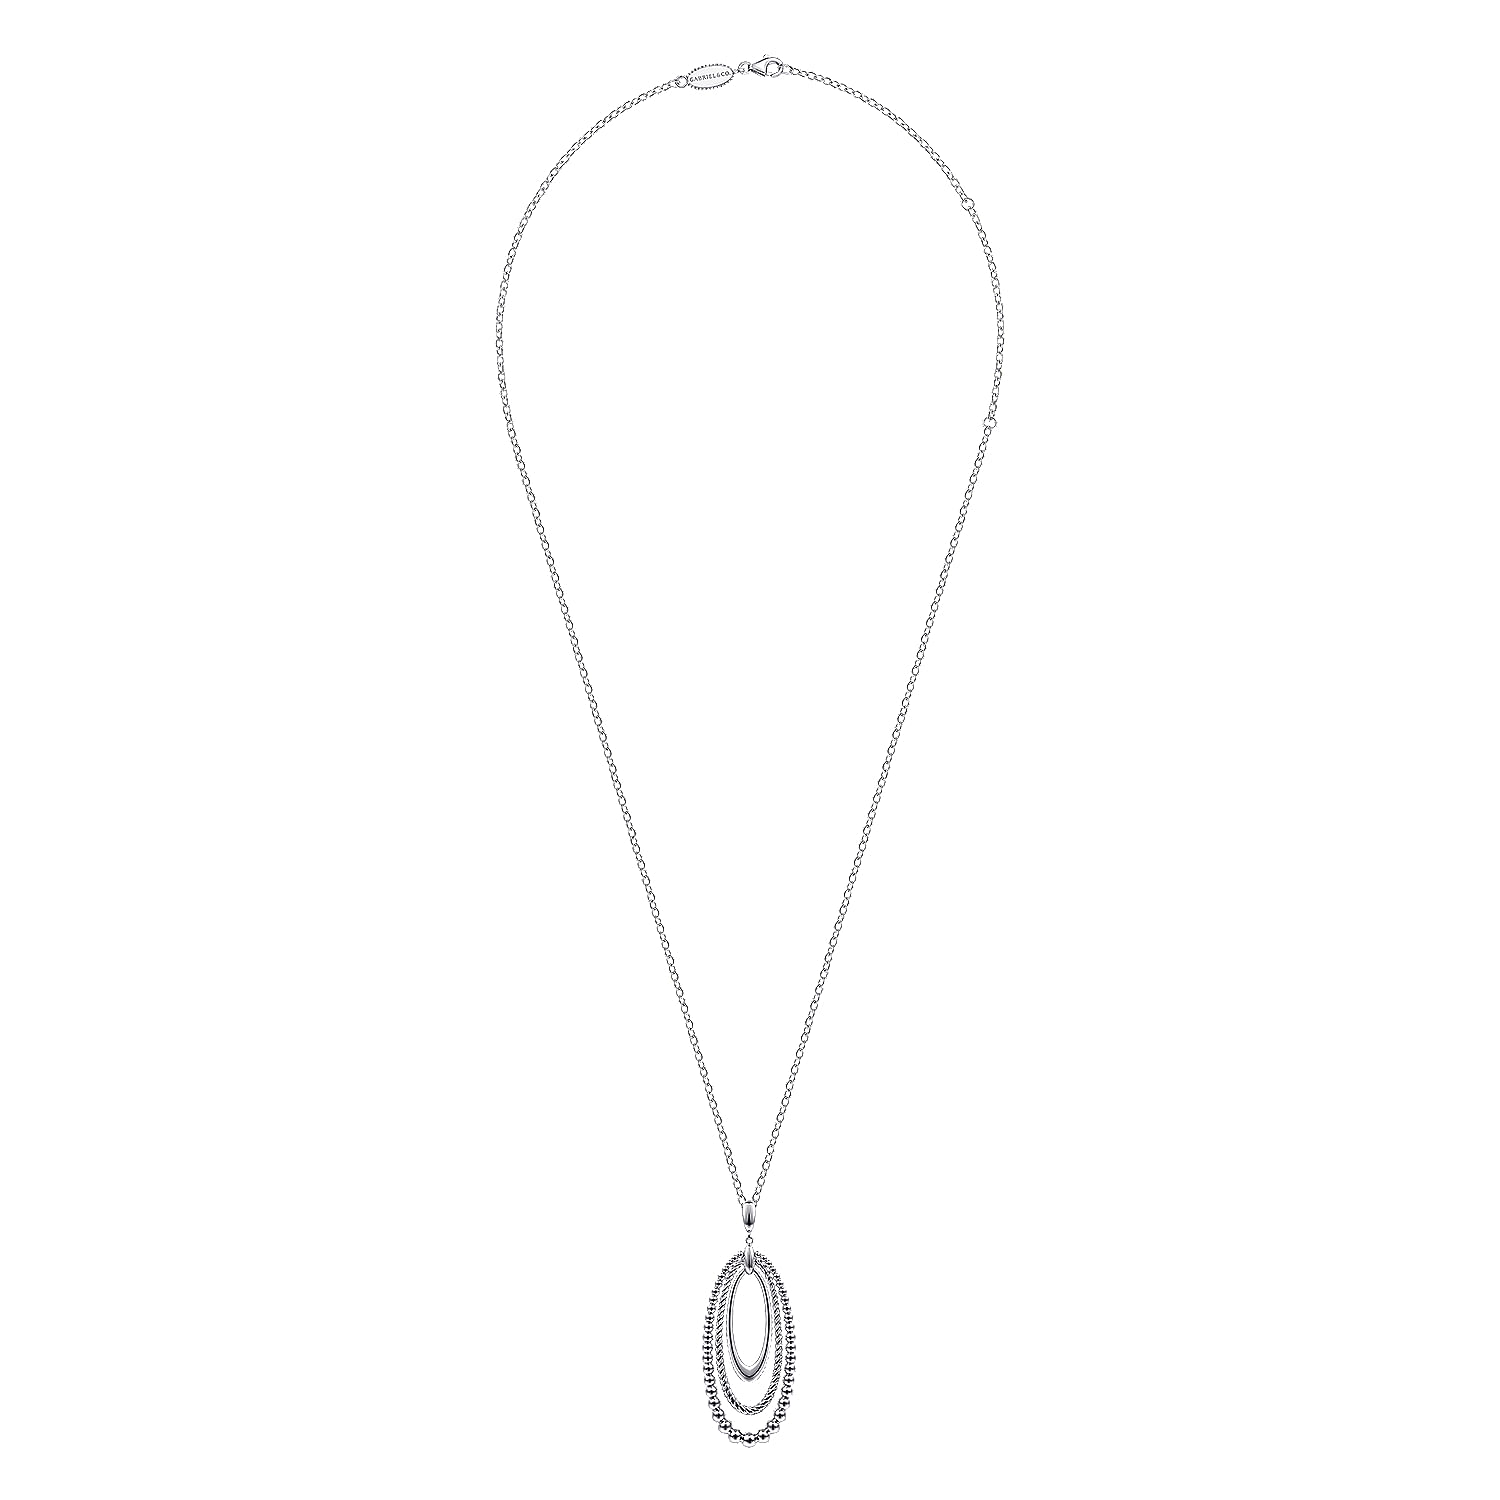 925 Sterling Silver Bujukan and Rope Circle Pendant Necklace